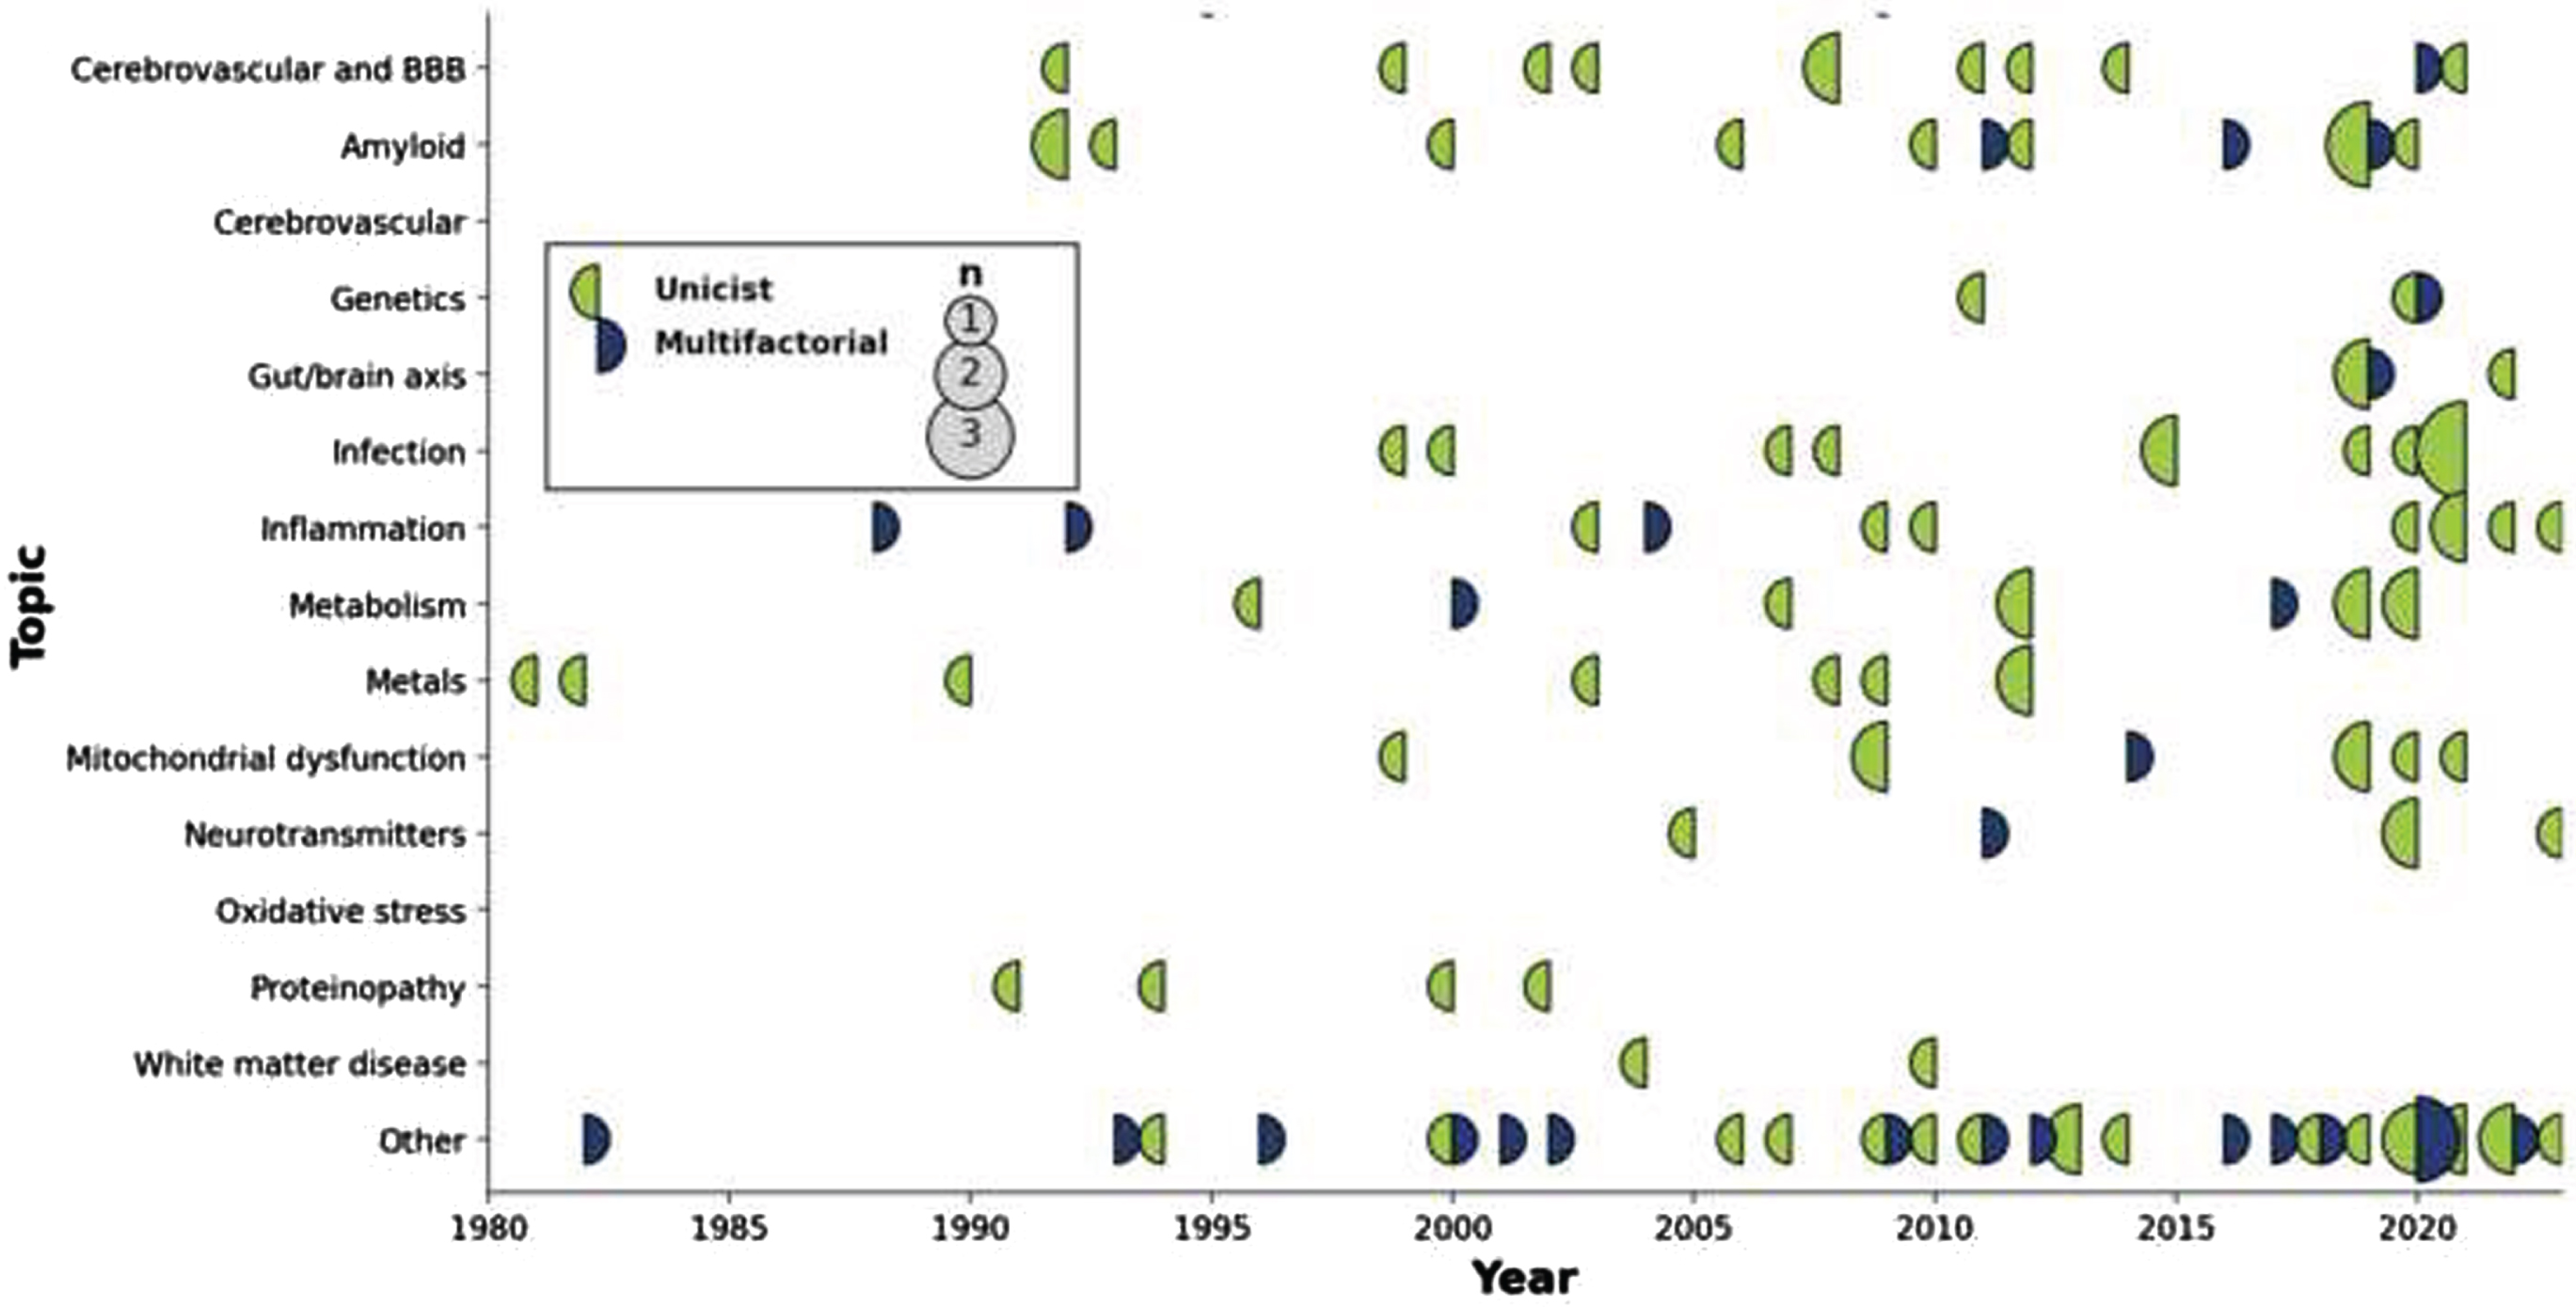 Display of articles by topic through time. Circles are sized according to the number of publications that year, with a color code indicating whether the published articles were unifactorial (left circle hemisphere) or multifactorial (right circle hemisphere).